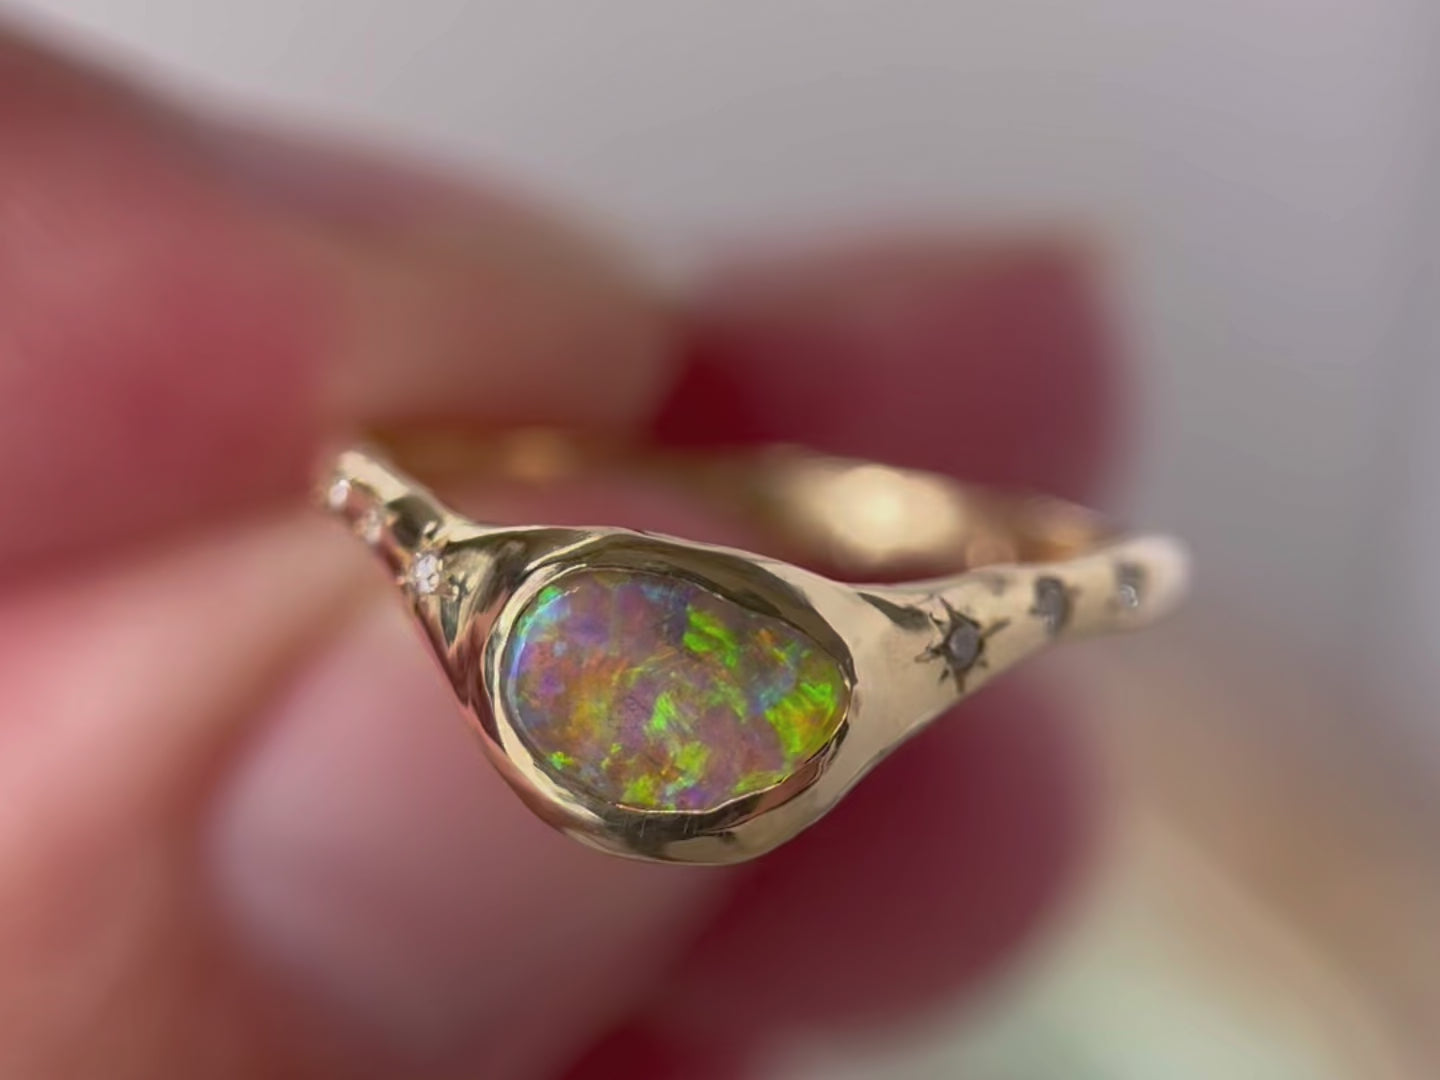 Close up video of a  crystal boulder opal that is bezel set on an  organically crafted band with three star set diamonds on each side of the stone.